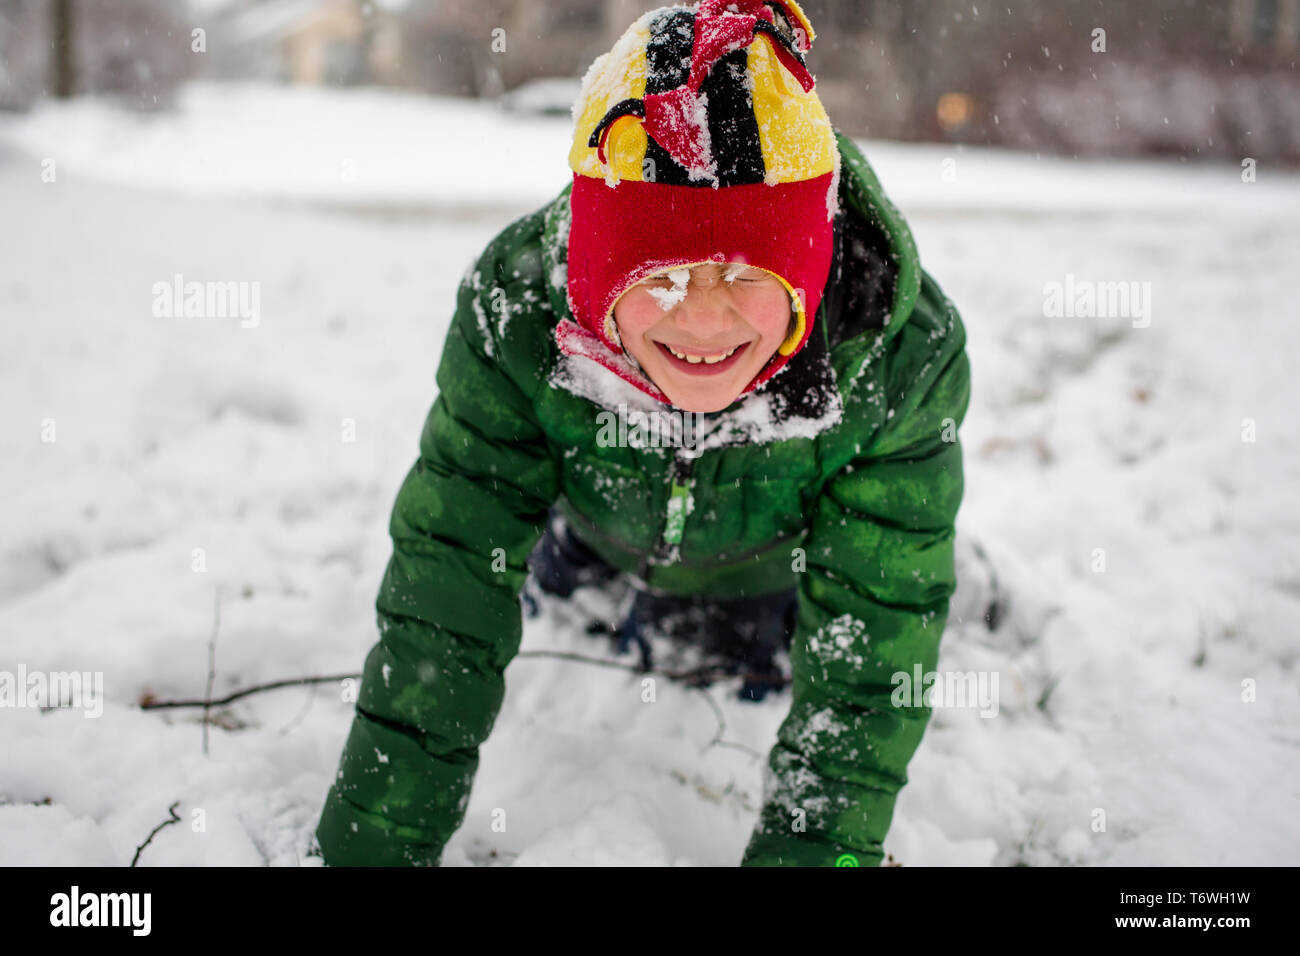 A small snow-covered child in fuzzy hat plays happily in snow Stock Photo